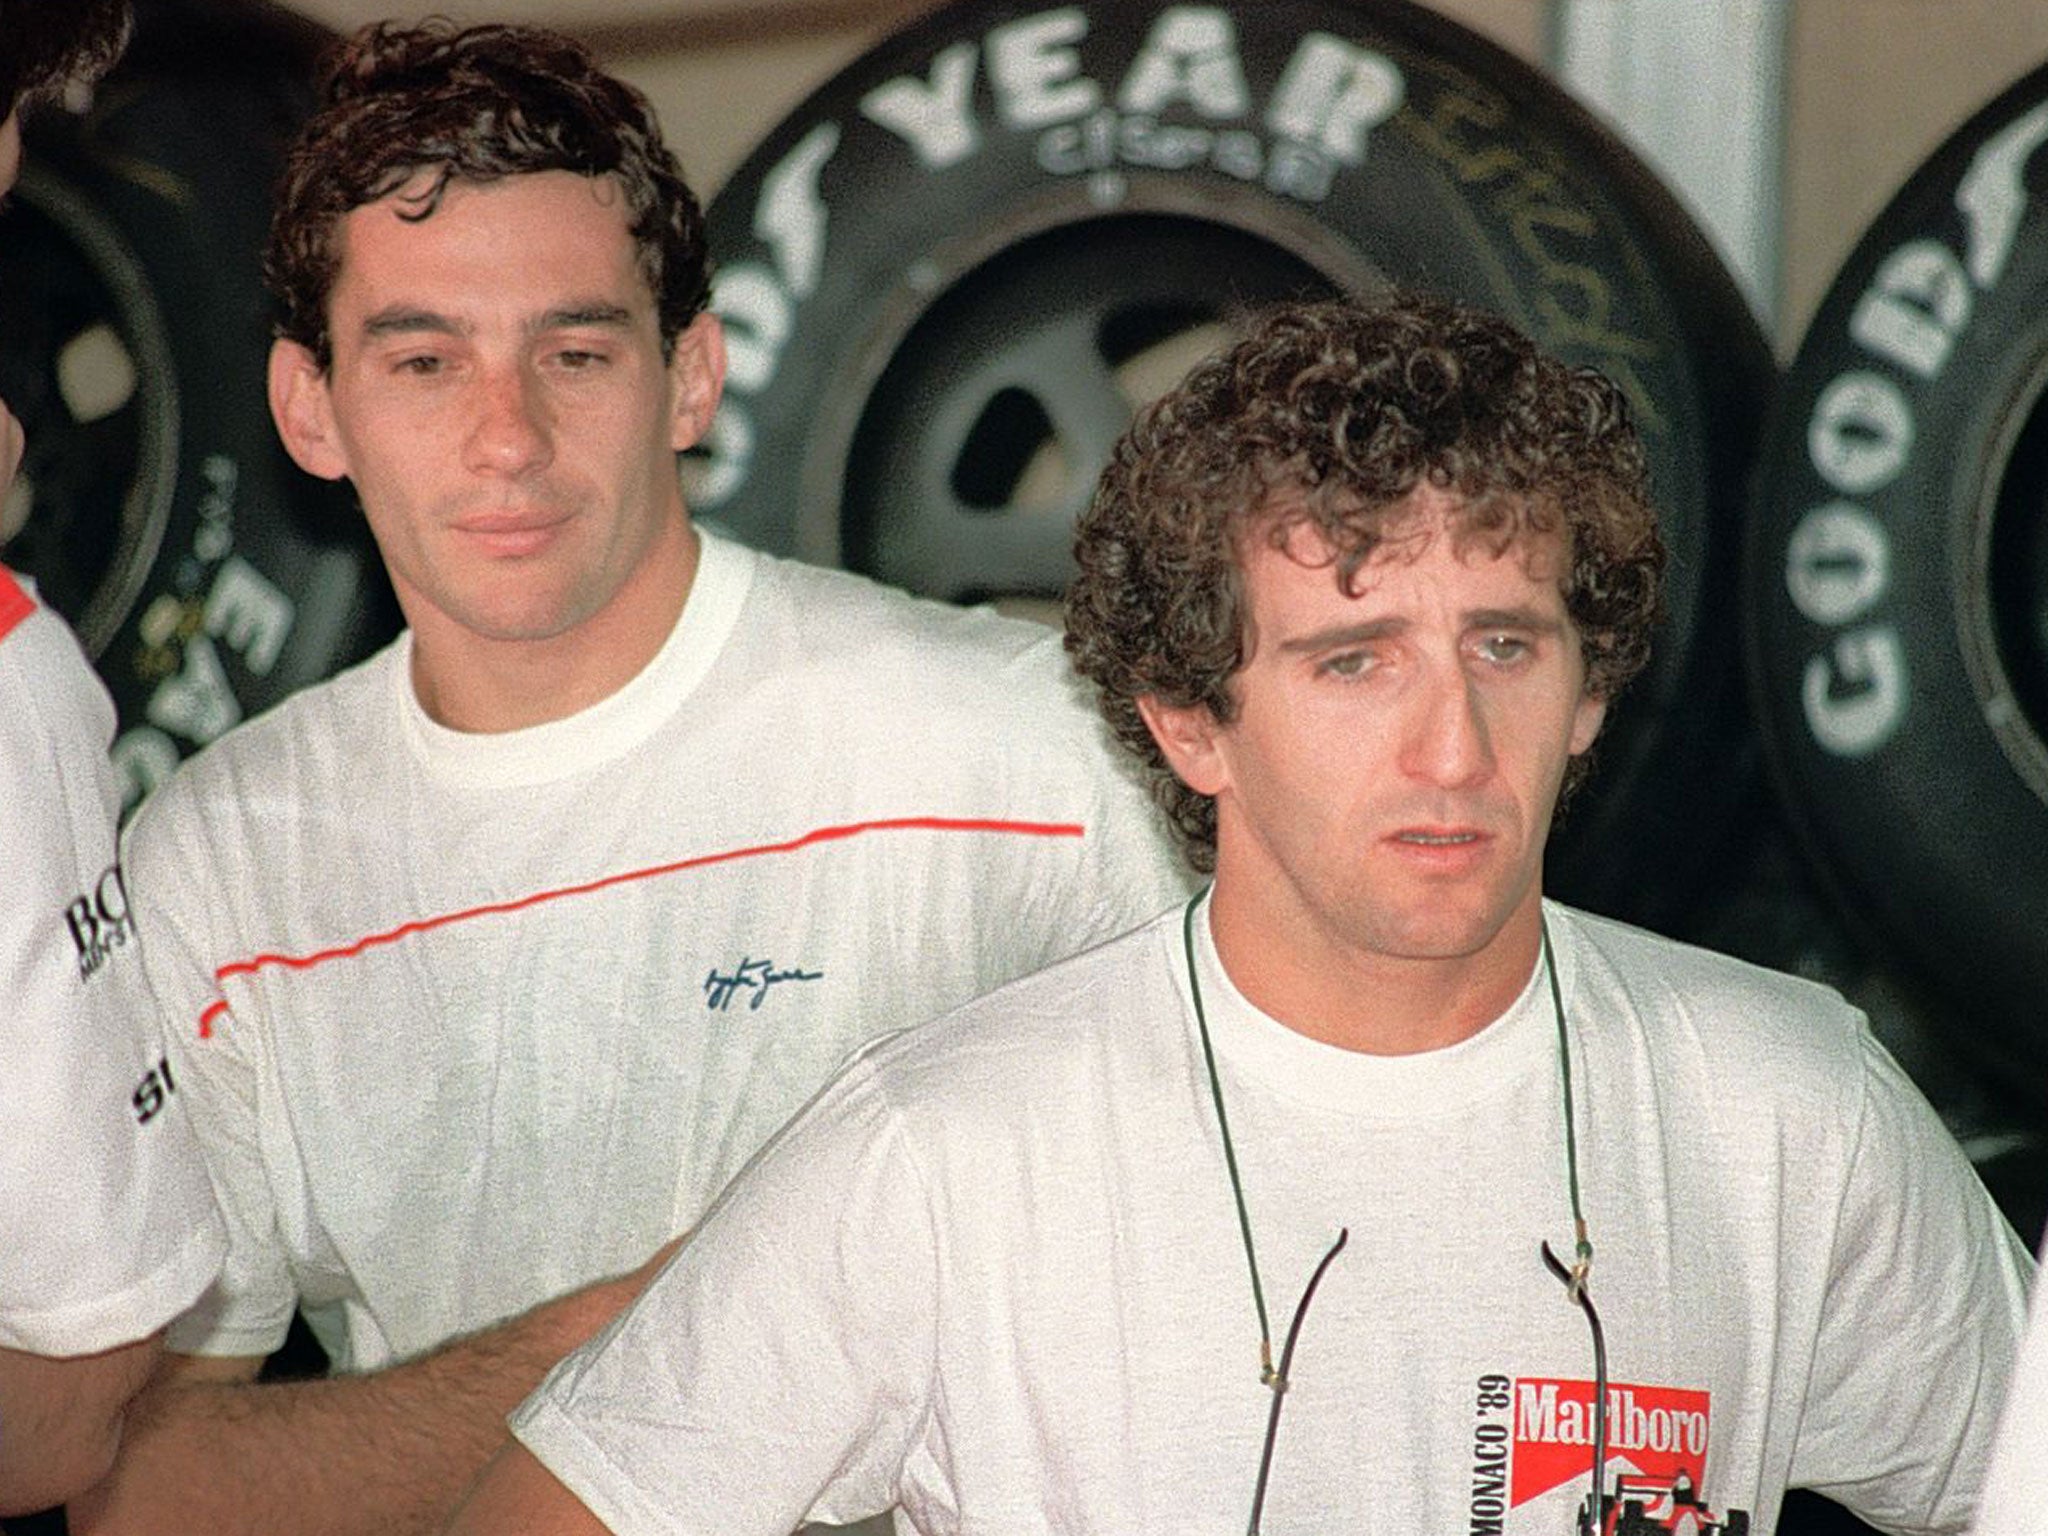 Ayrton Senna (left) and Alain Prost, could not stand the sight of each other as McLaren team-mates in 1989 (Getty Images)